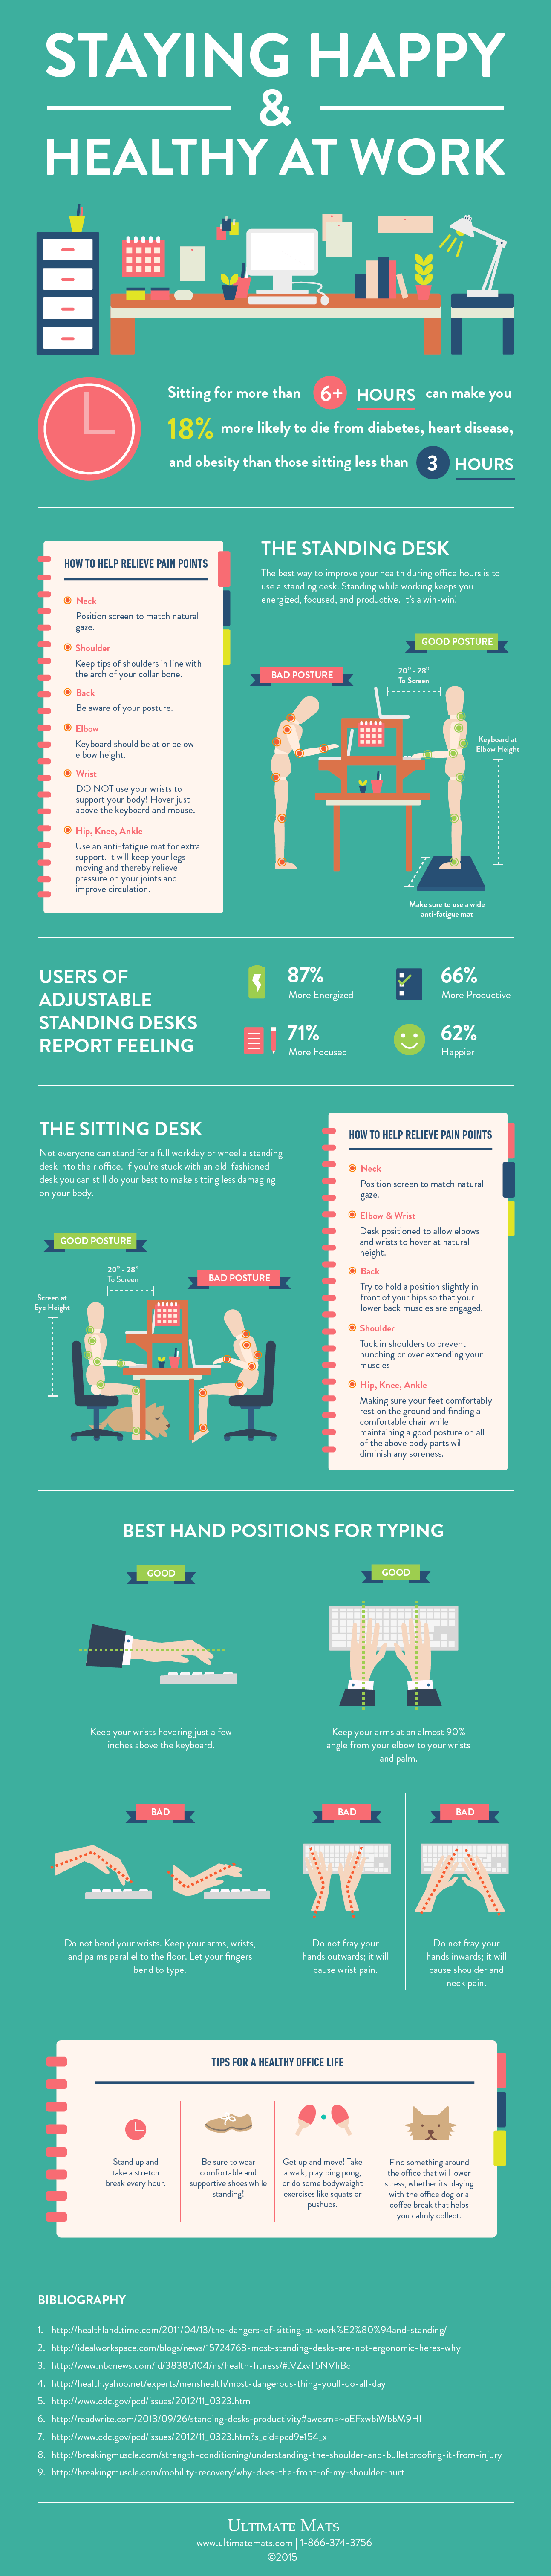 Staying Happy and Healthy at Work Infographic